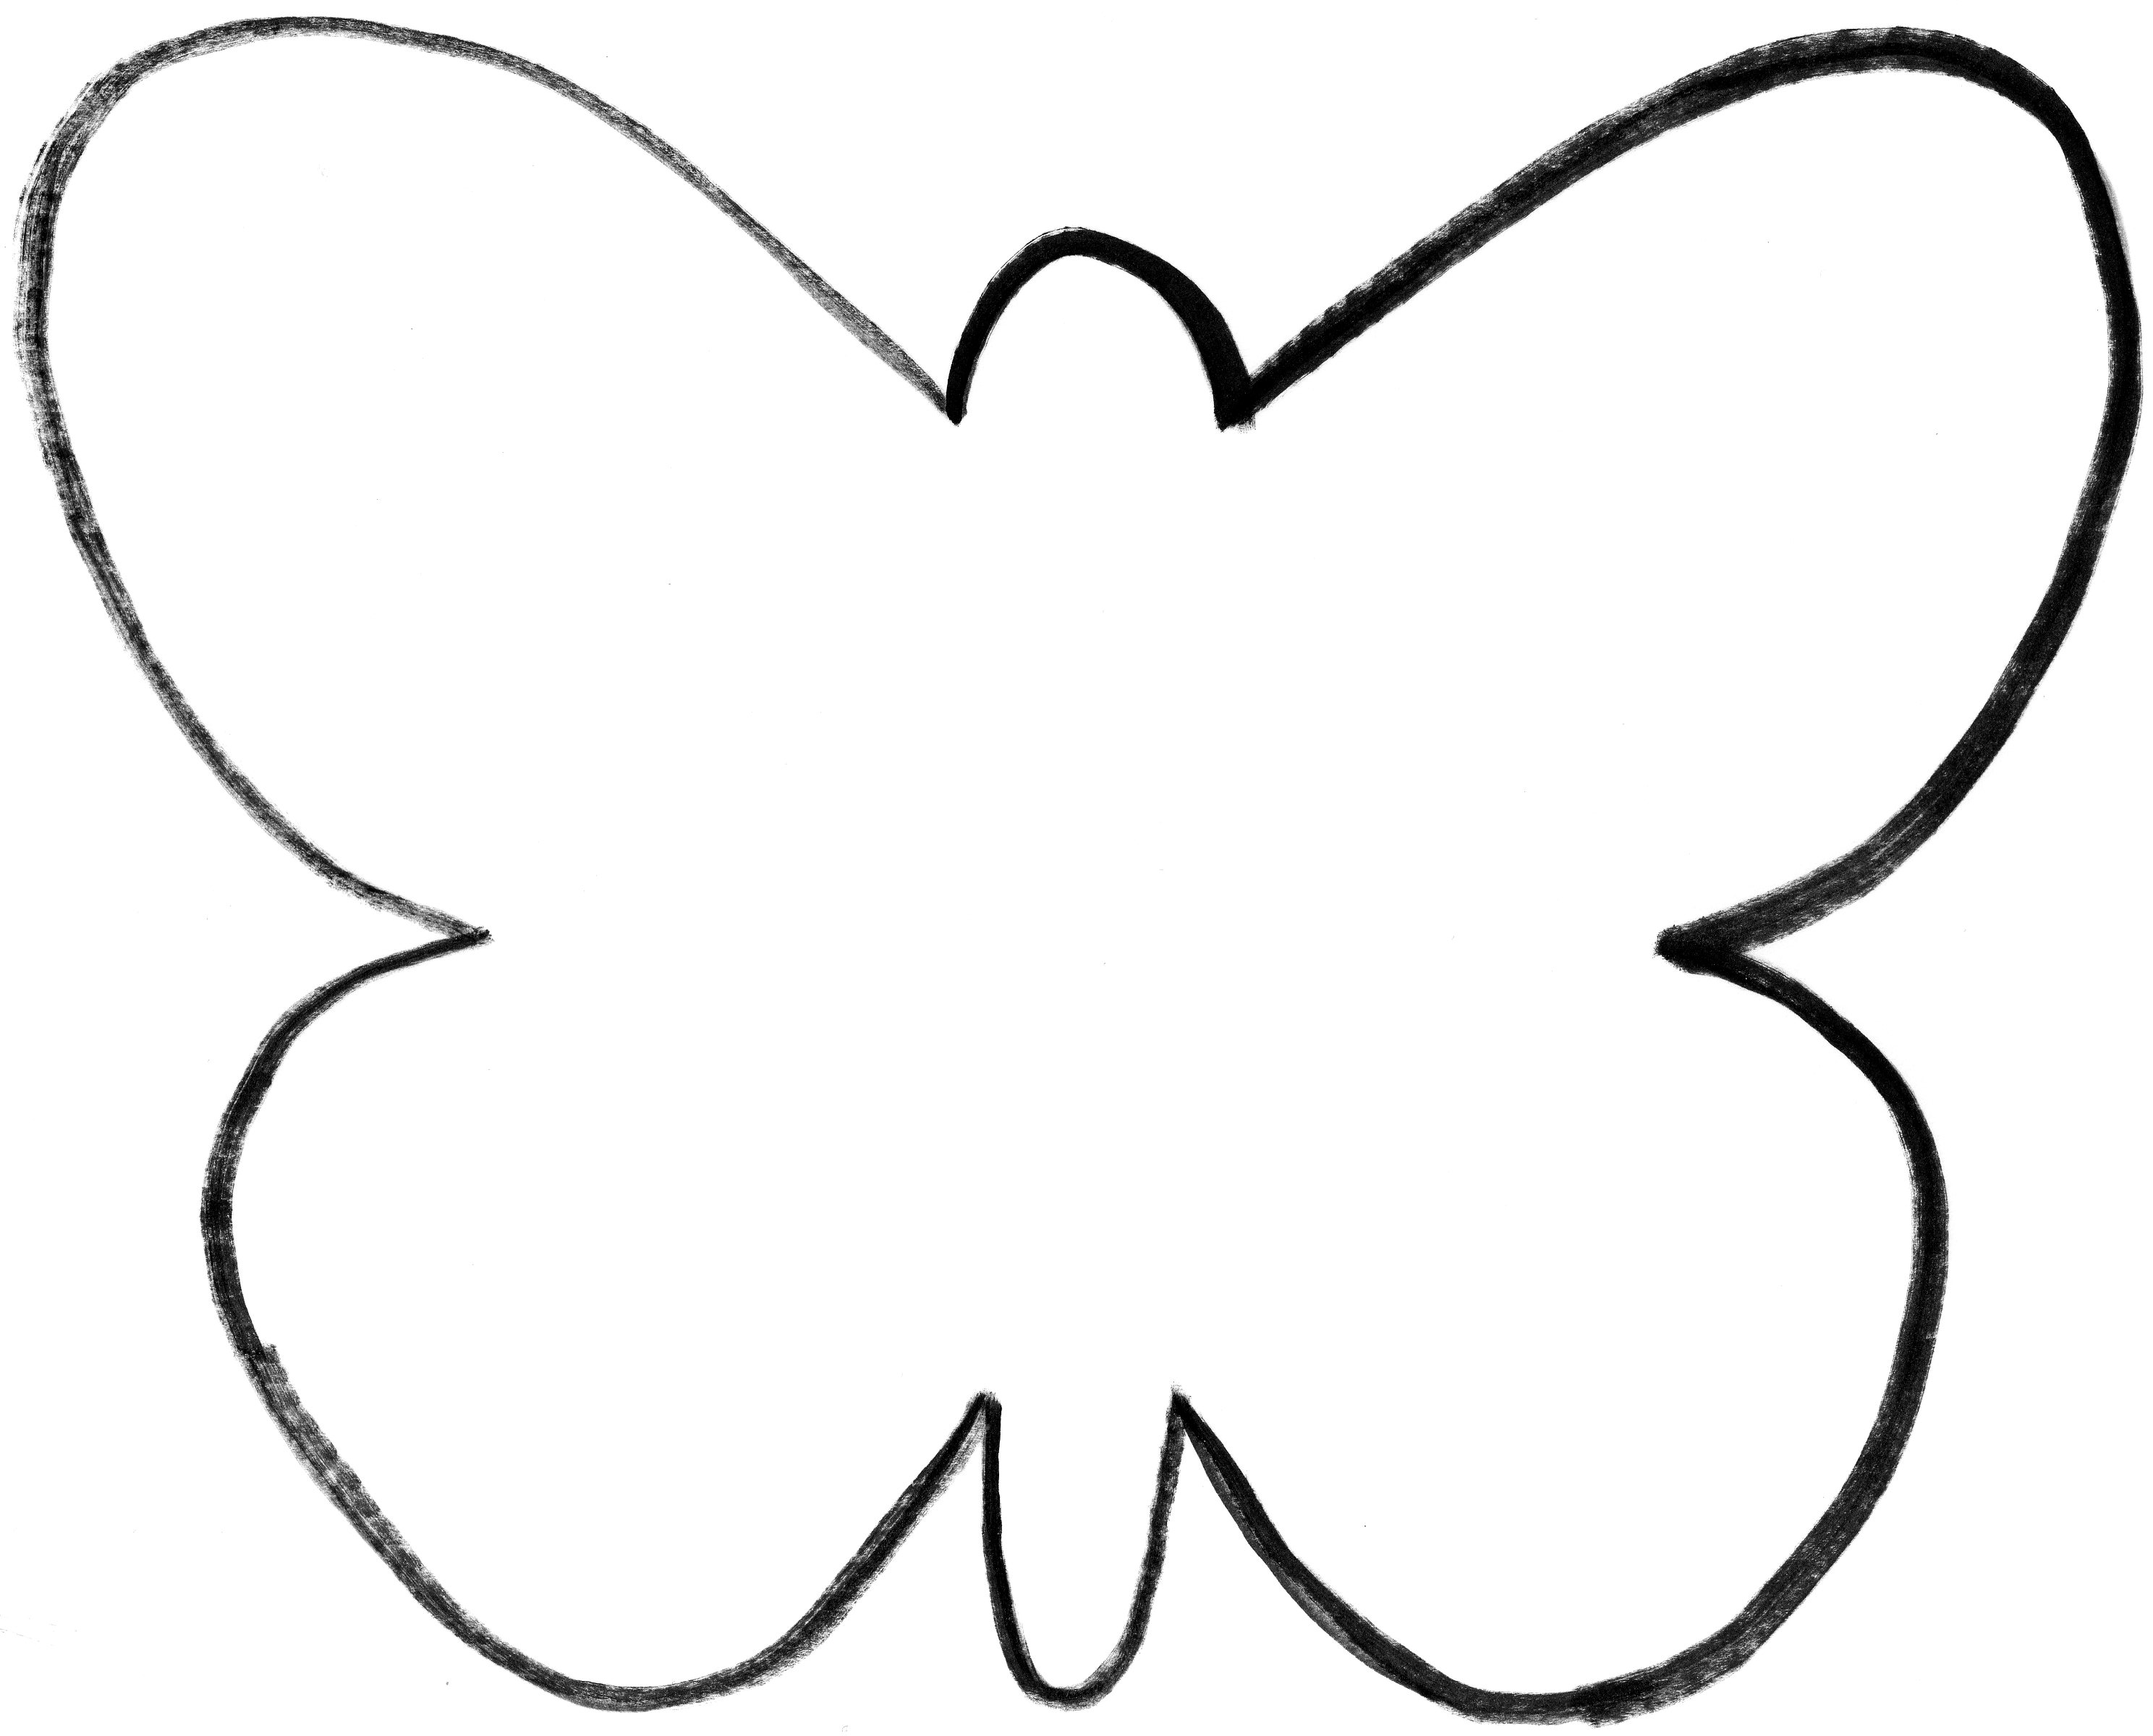 6 Best Images of Printable Butterfly Cut Out Pattern - Butterfly ...